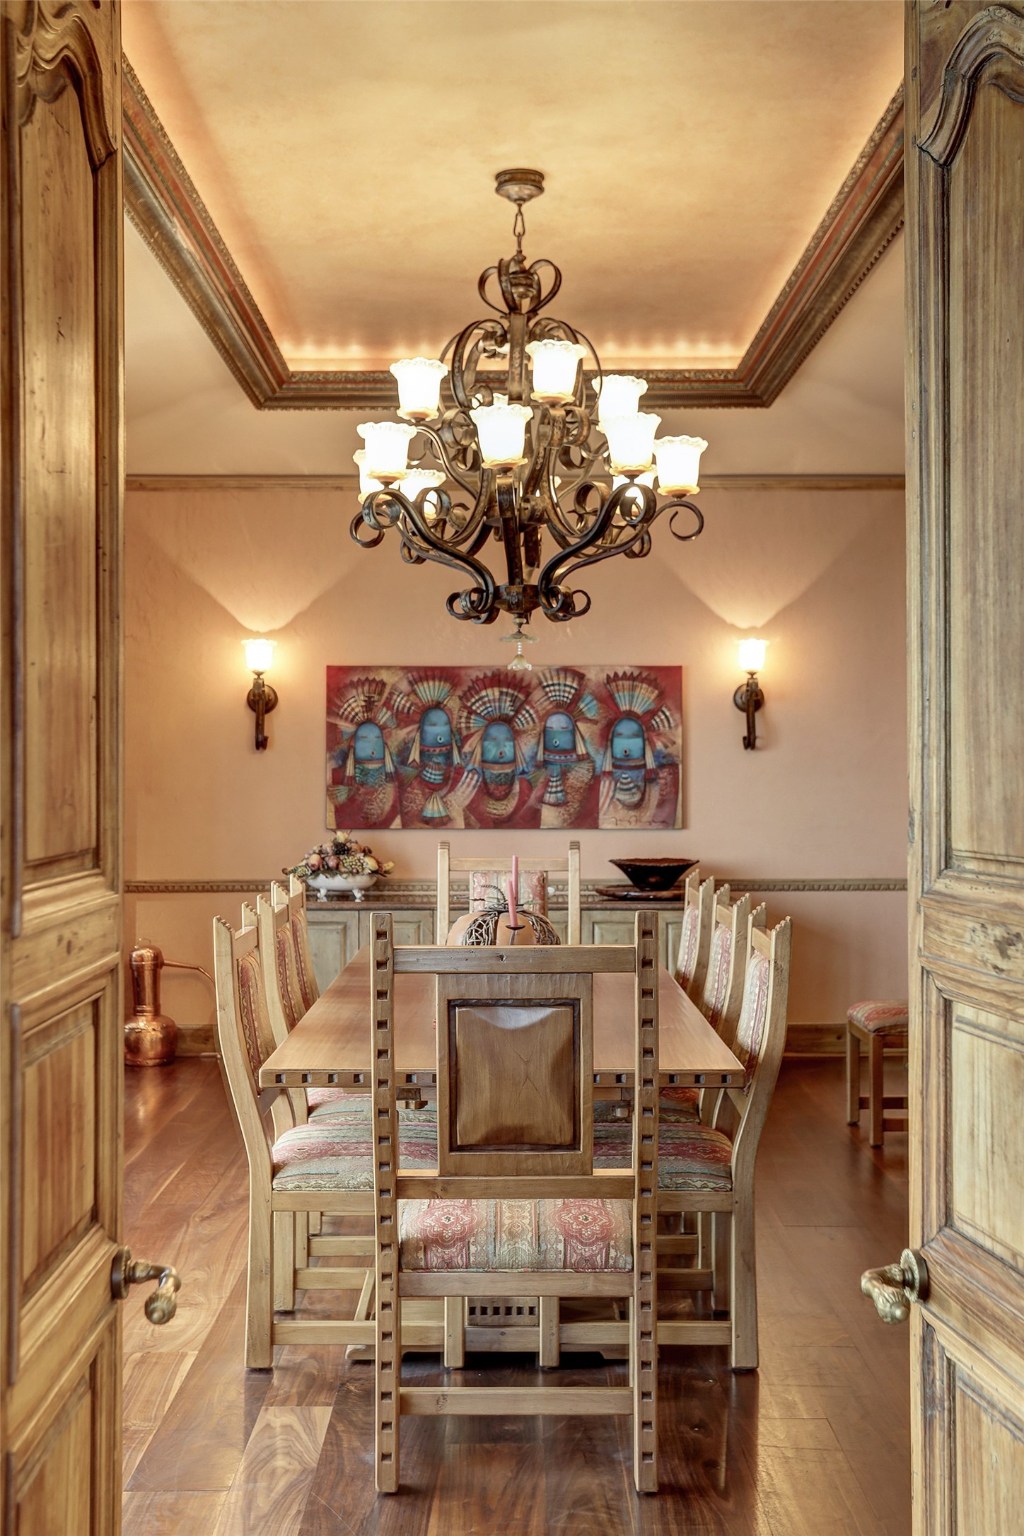 A pair of antique wooden doors open from the Living room into the formal Dinning room.  There is a recessed, faux gilt ceiling in a baroque frame.